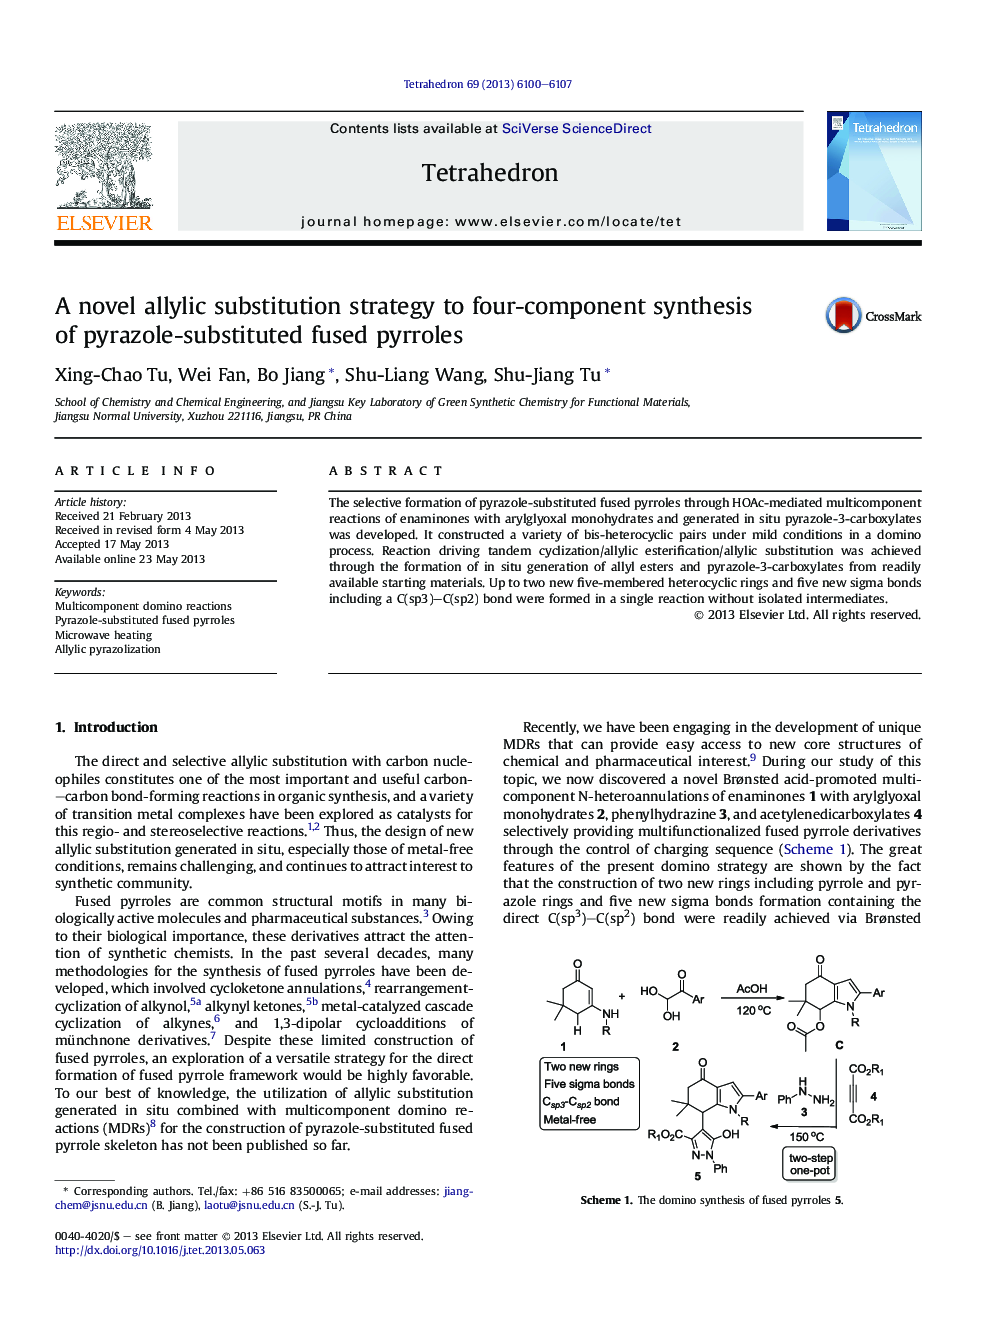 A novel allylic substitution strategy to four-component synthesis of pyrazole-substituted fused pyrroles